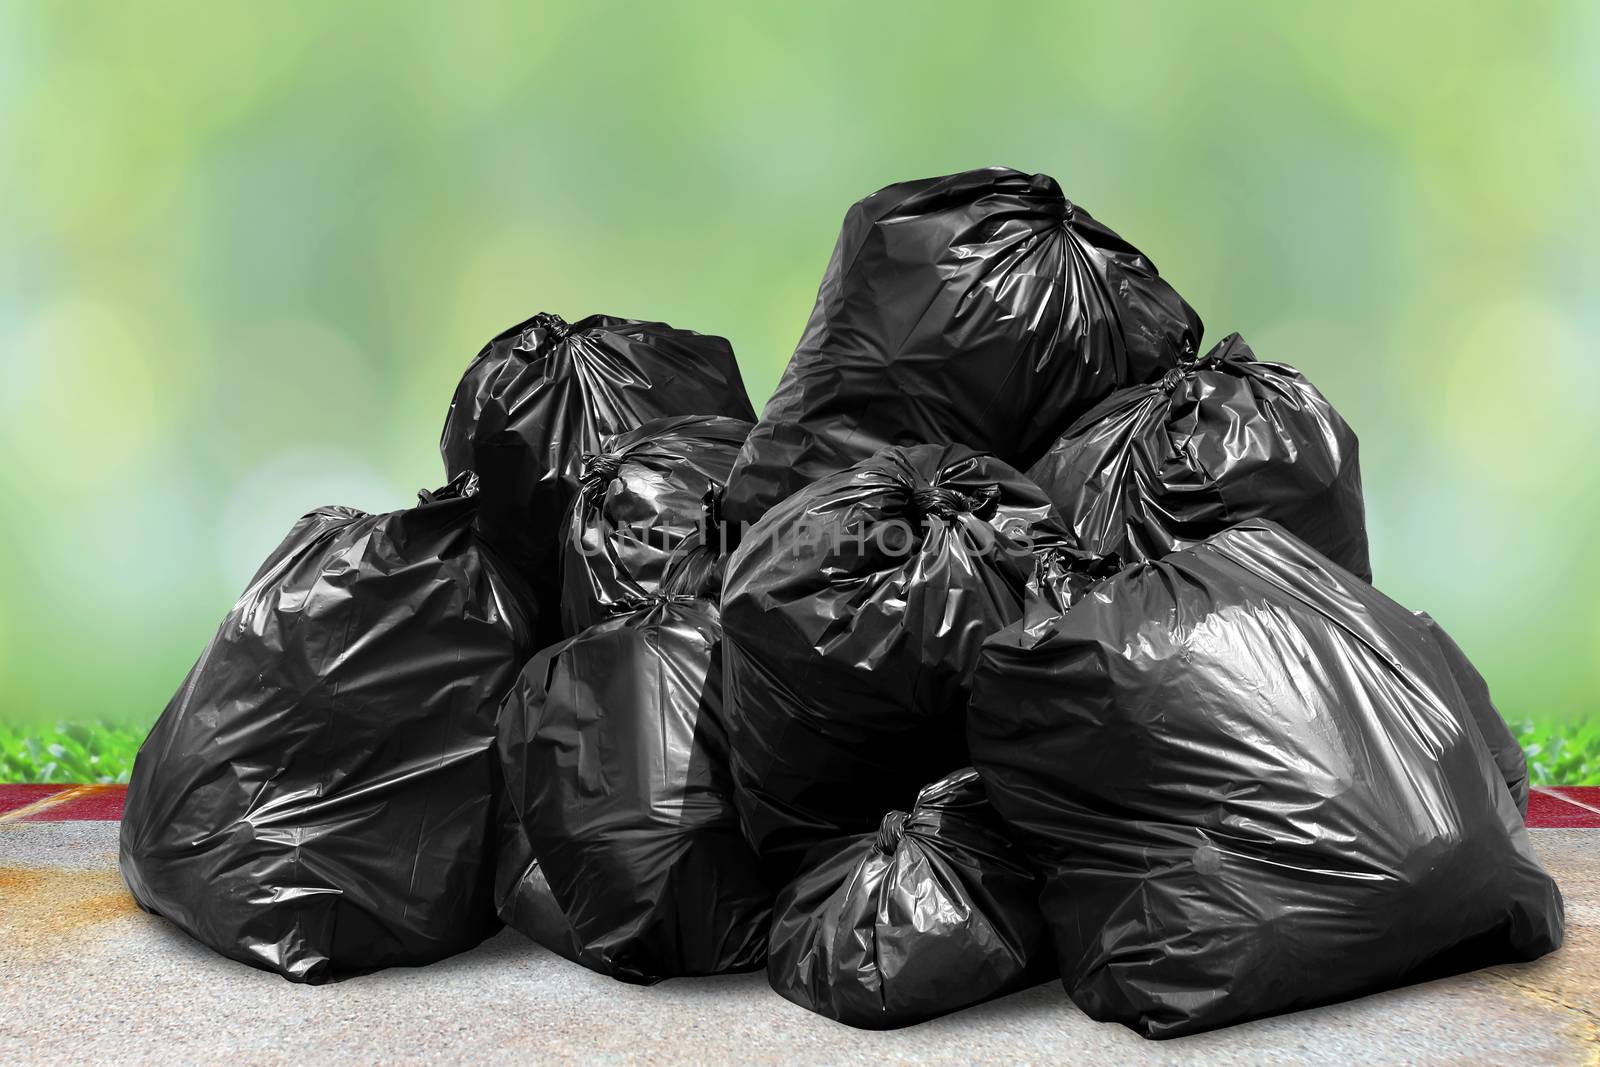 garbage is pile lots dump, many garbage plastic bags black waste on nature sunshine, pollution from trash plastic waste garbage, bags bin of plastic waste, pile of garbage waste, lots of junk dump by cgdeaw